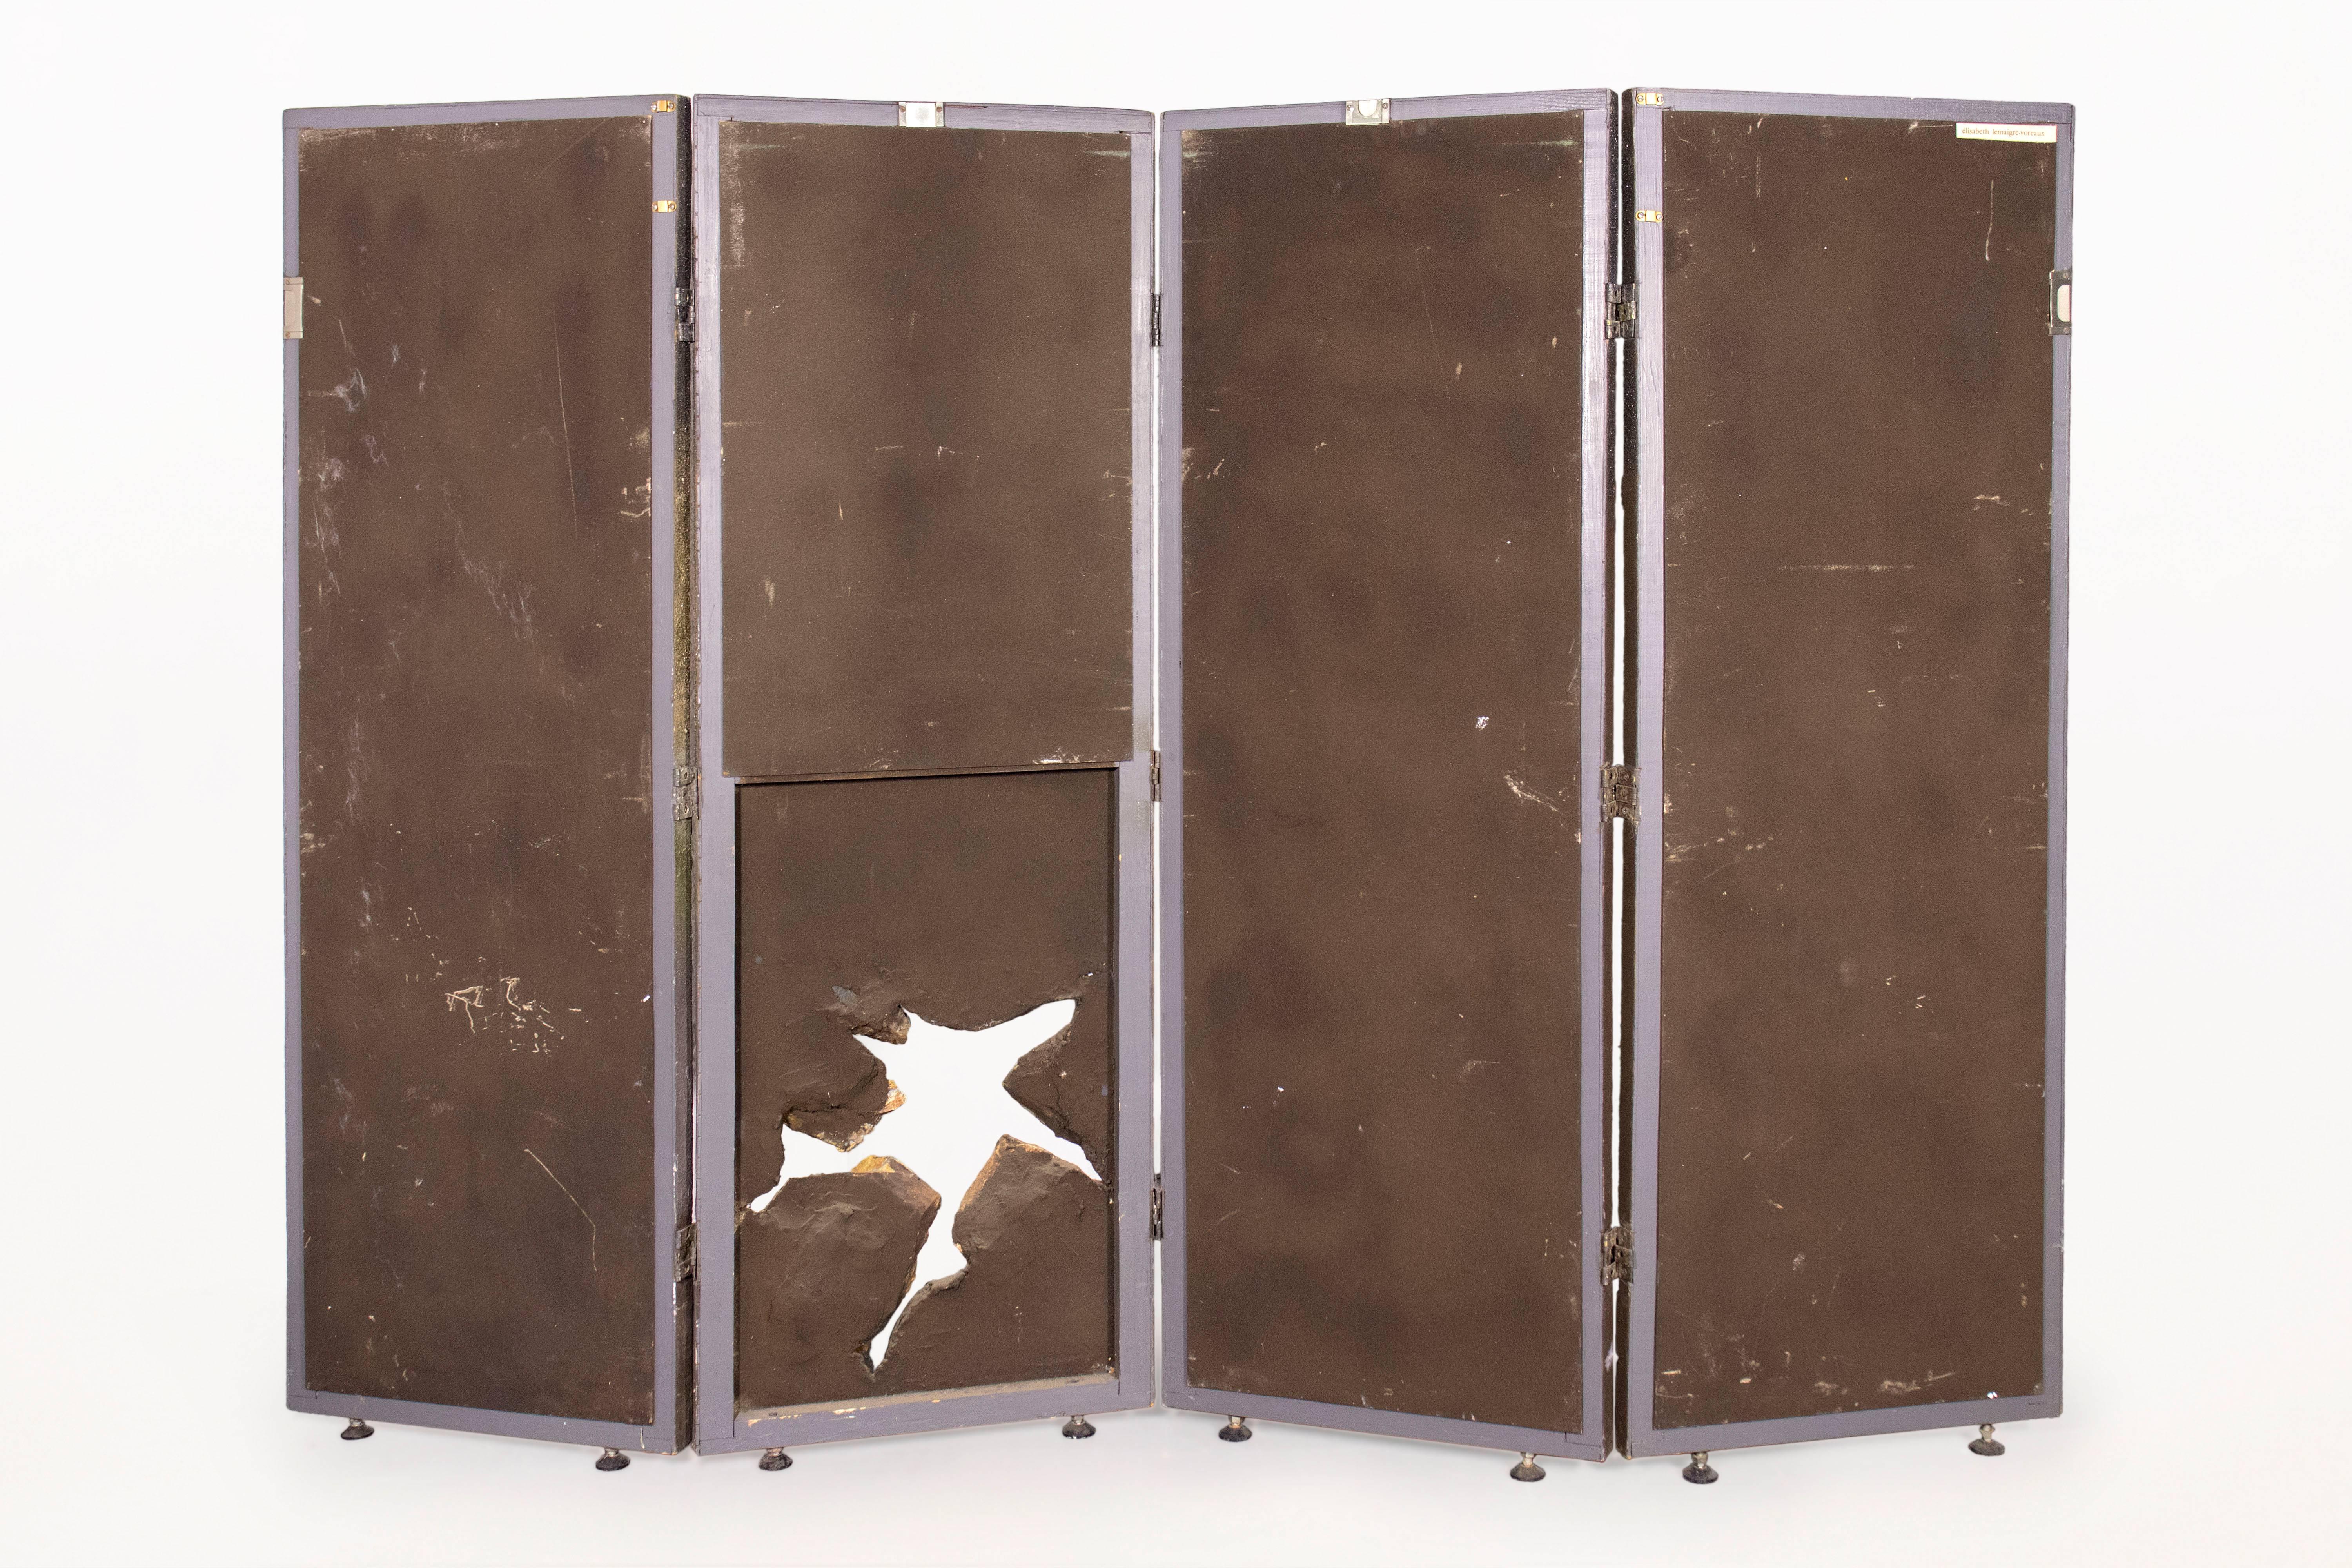 Amethyst, Mika and slate four-panel screen by Elisabeth Lemaigre-Voreaux
Very original design with her characteristic hole in the third panel
Design for Hermes.
Signed
circa 1970, France
Very good vintage condition.